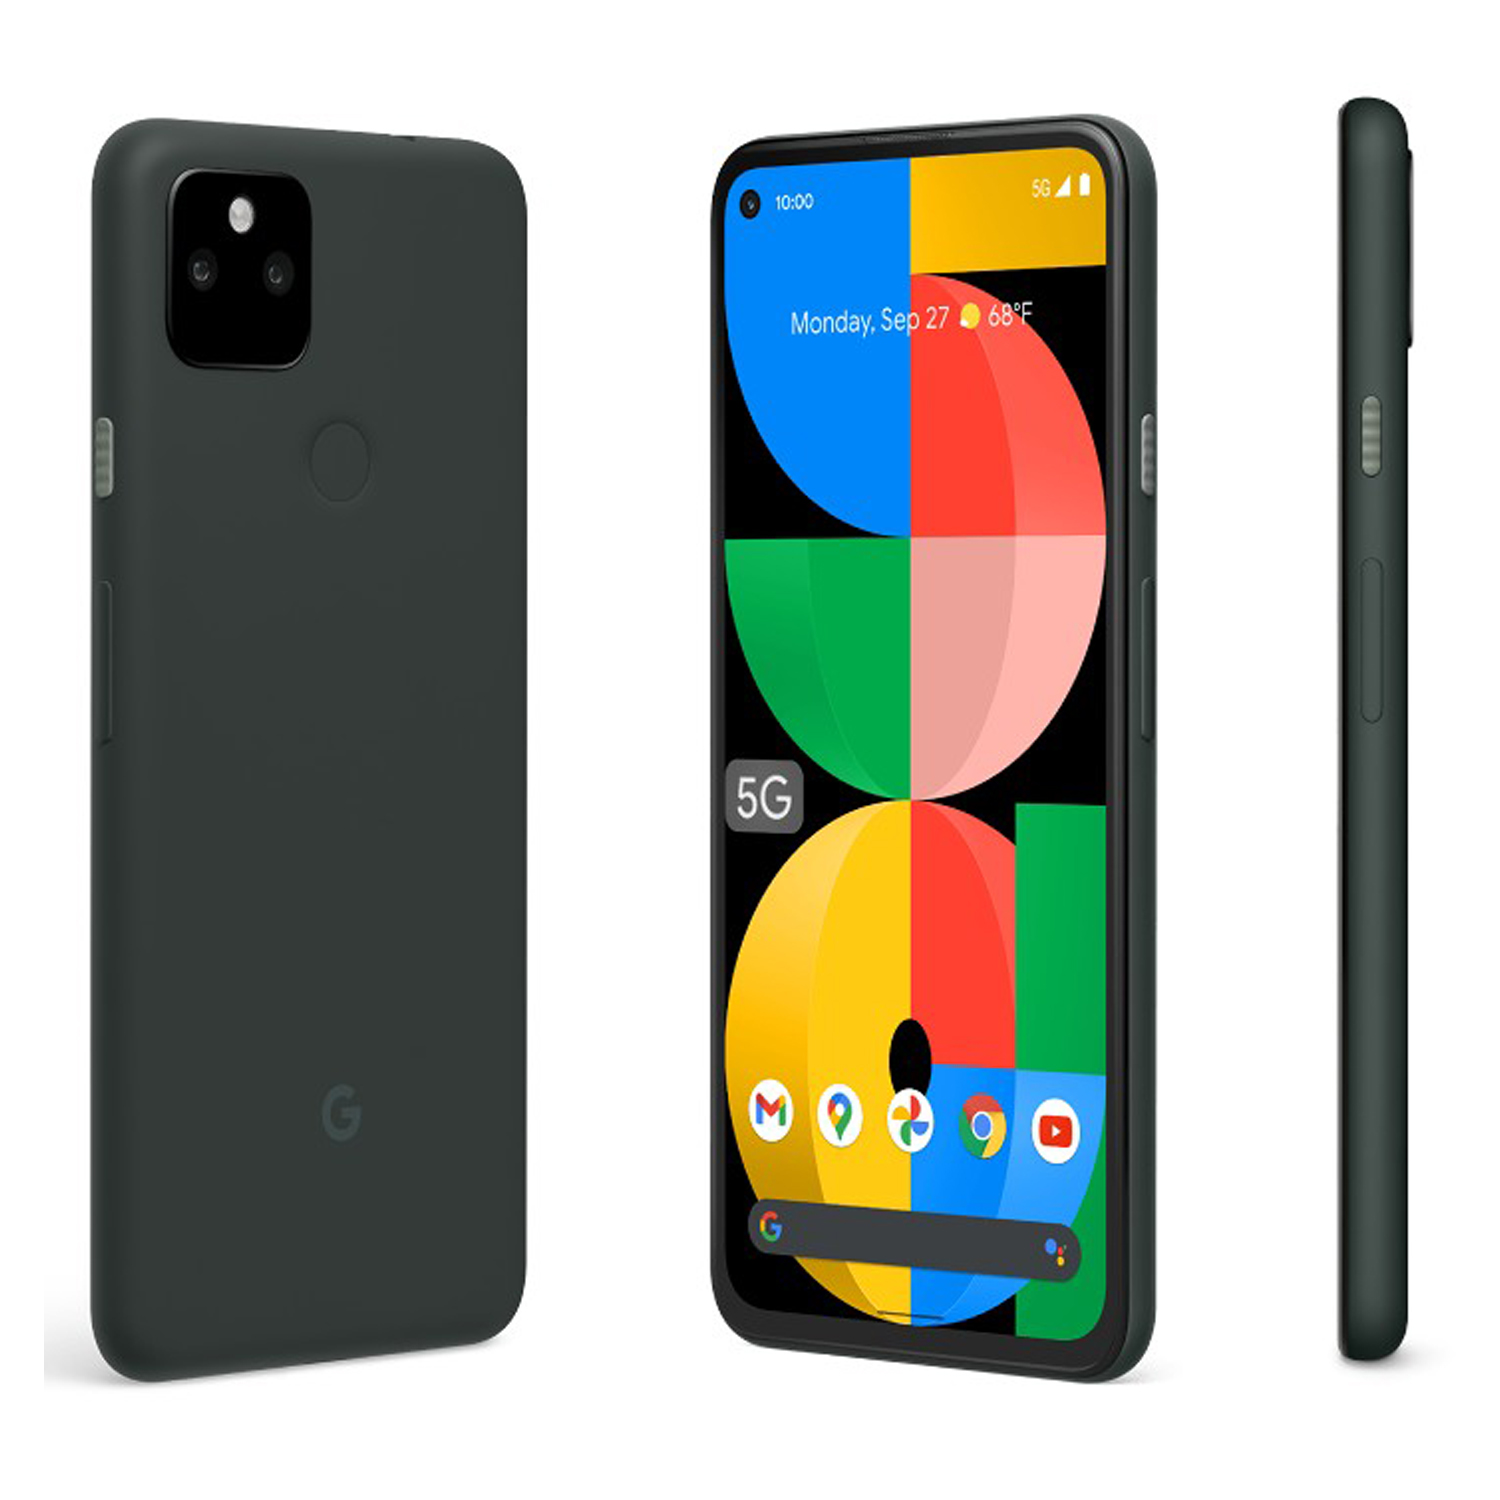 Google Pixel 5a 5G - Mobile Phone Specifications & Price - GadgetsRealm